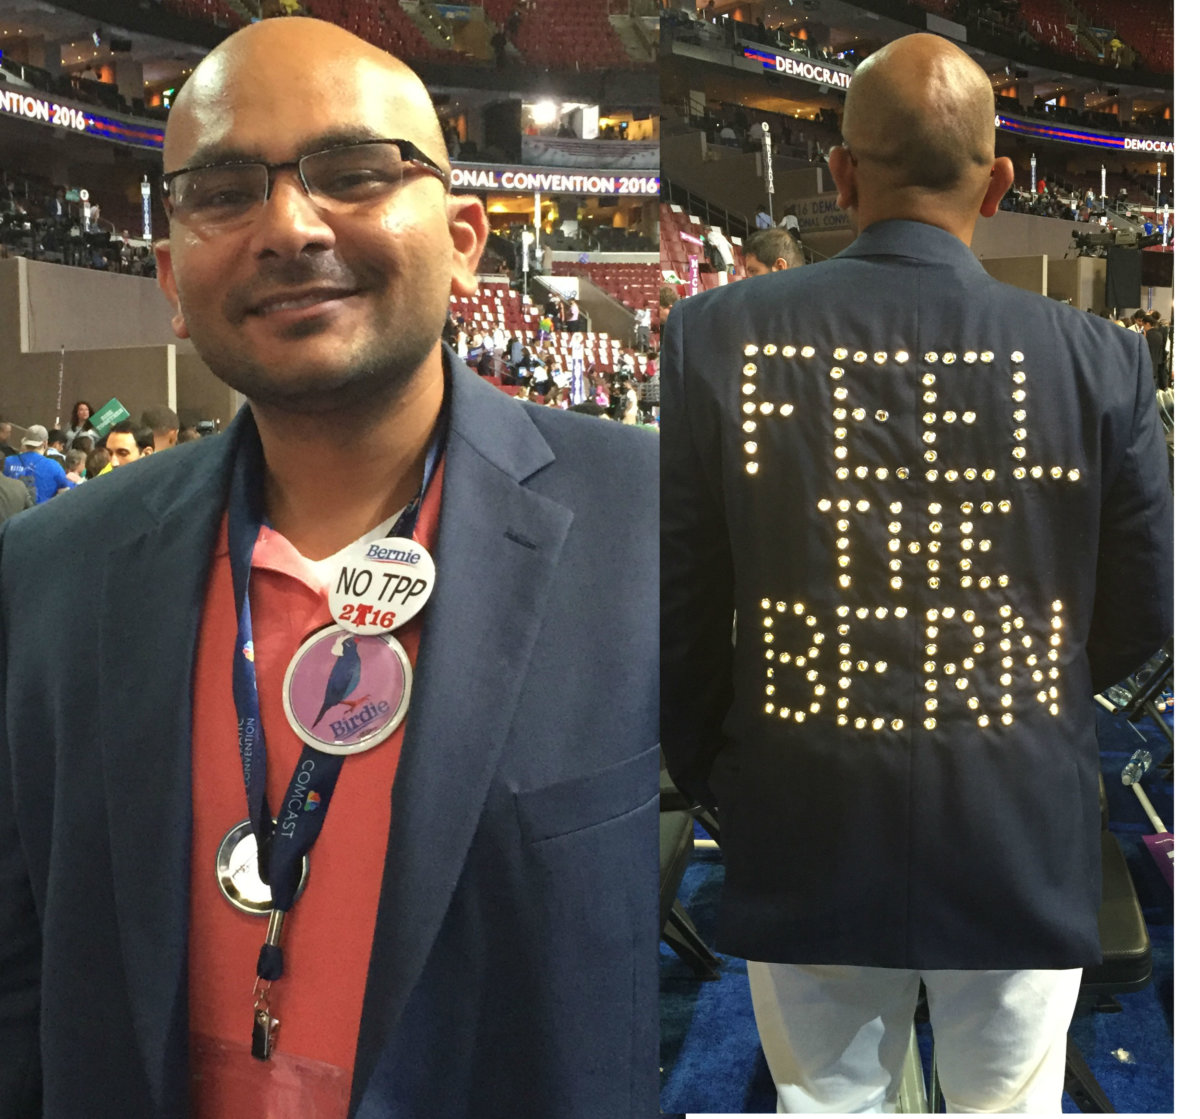 PHOTOS: Check out these outrageous DNC outfits